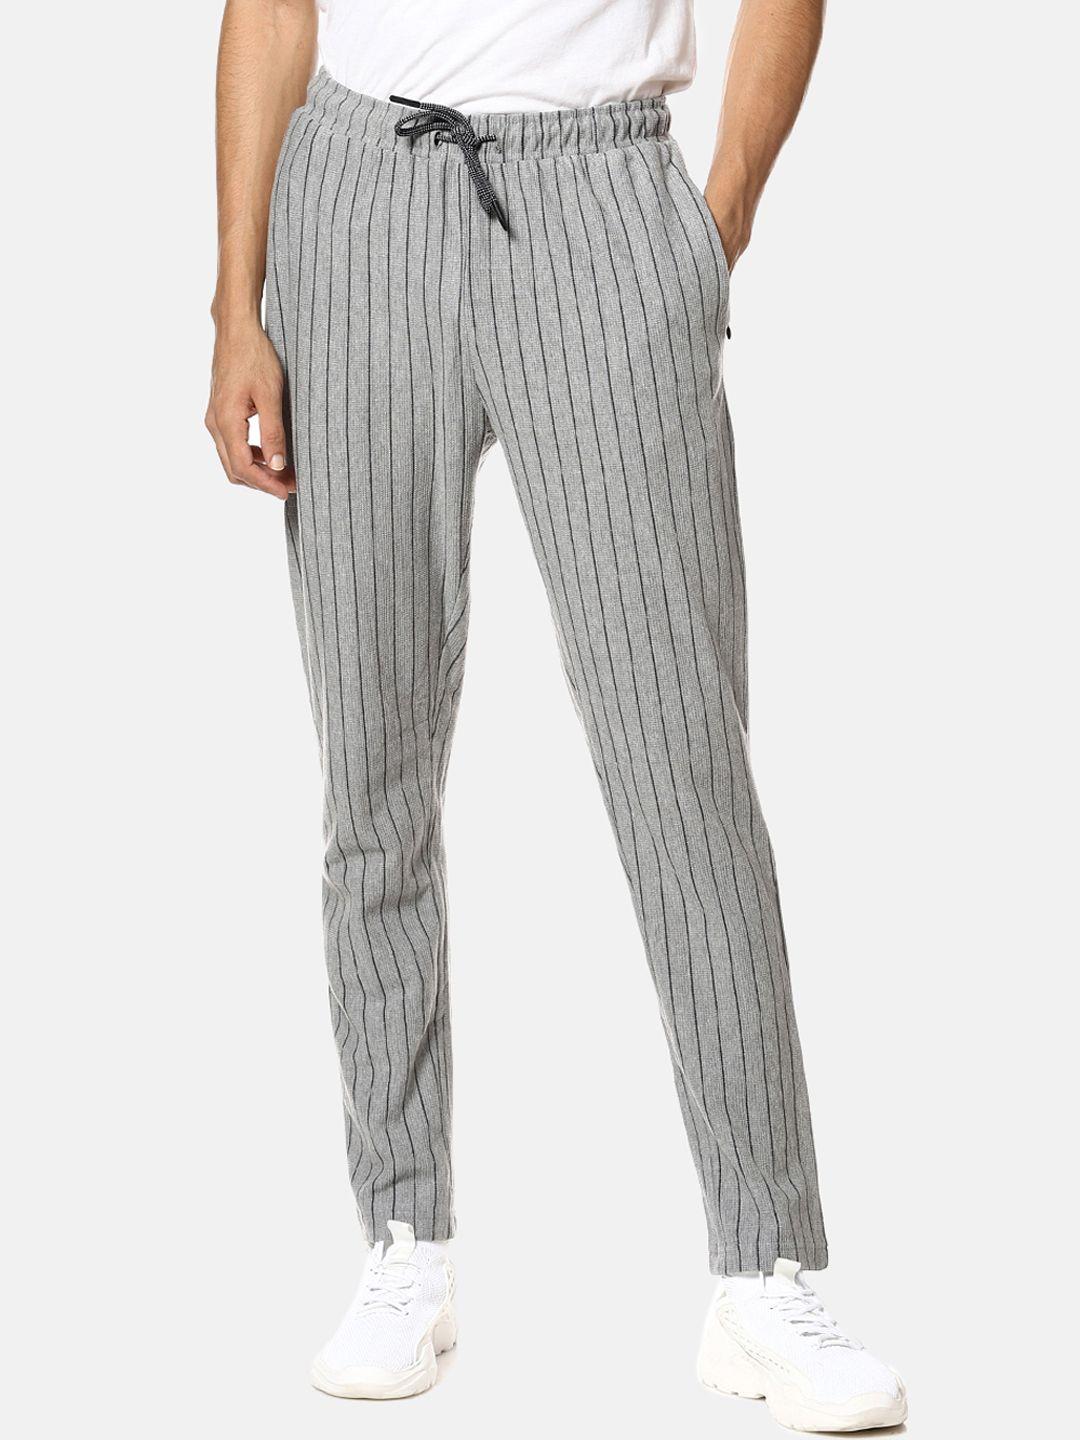 campus sutra men grey striped track pants